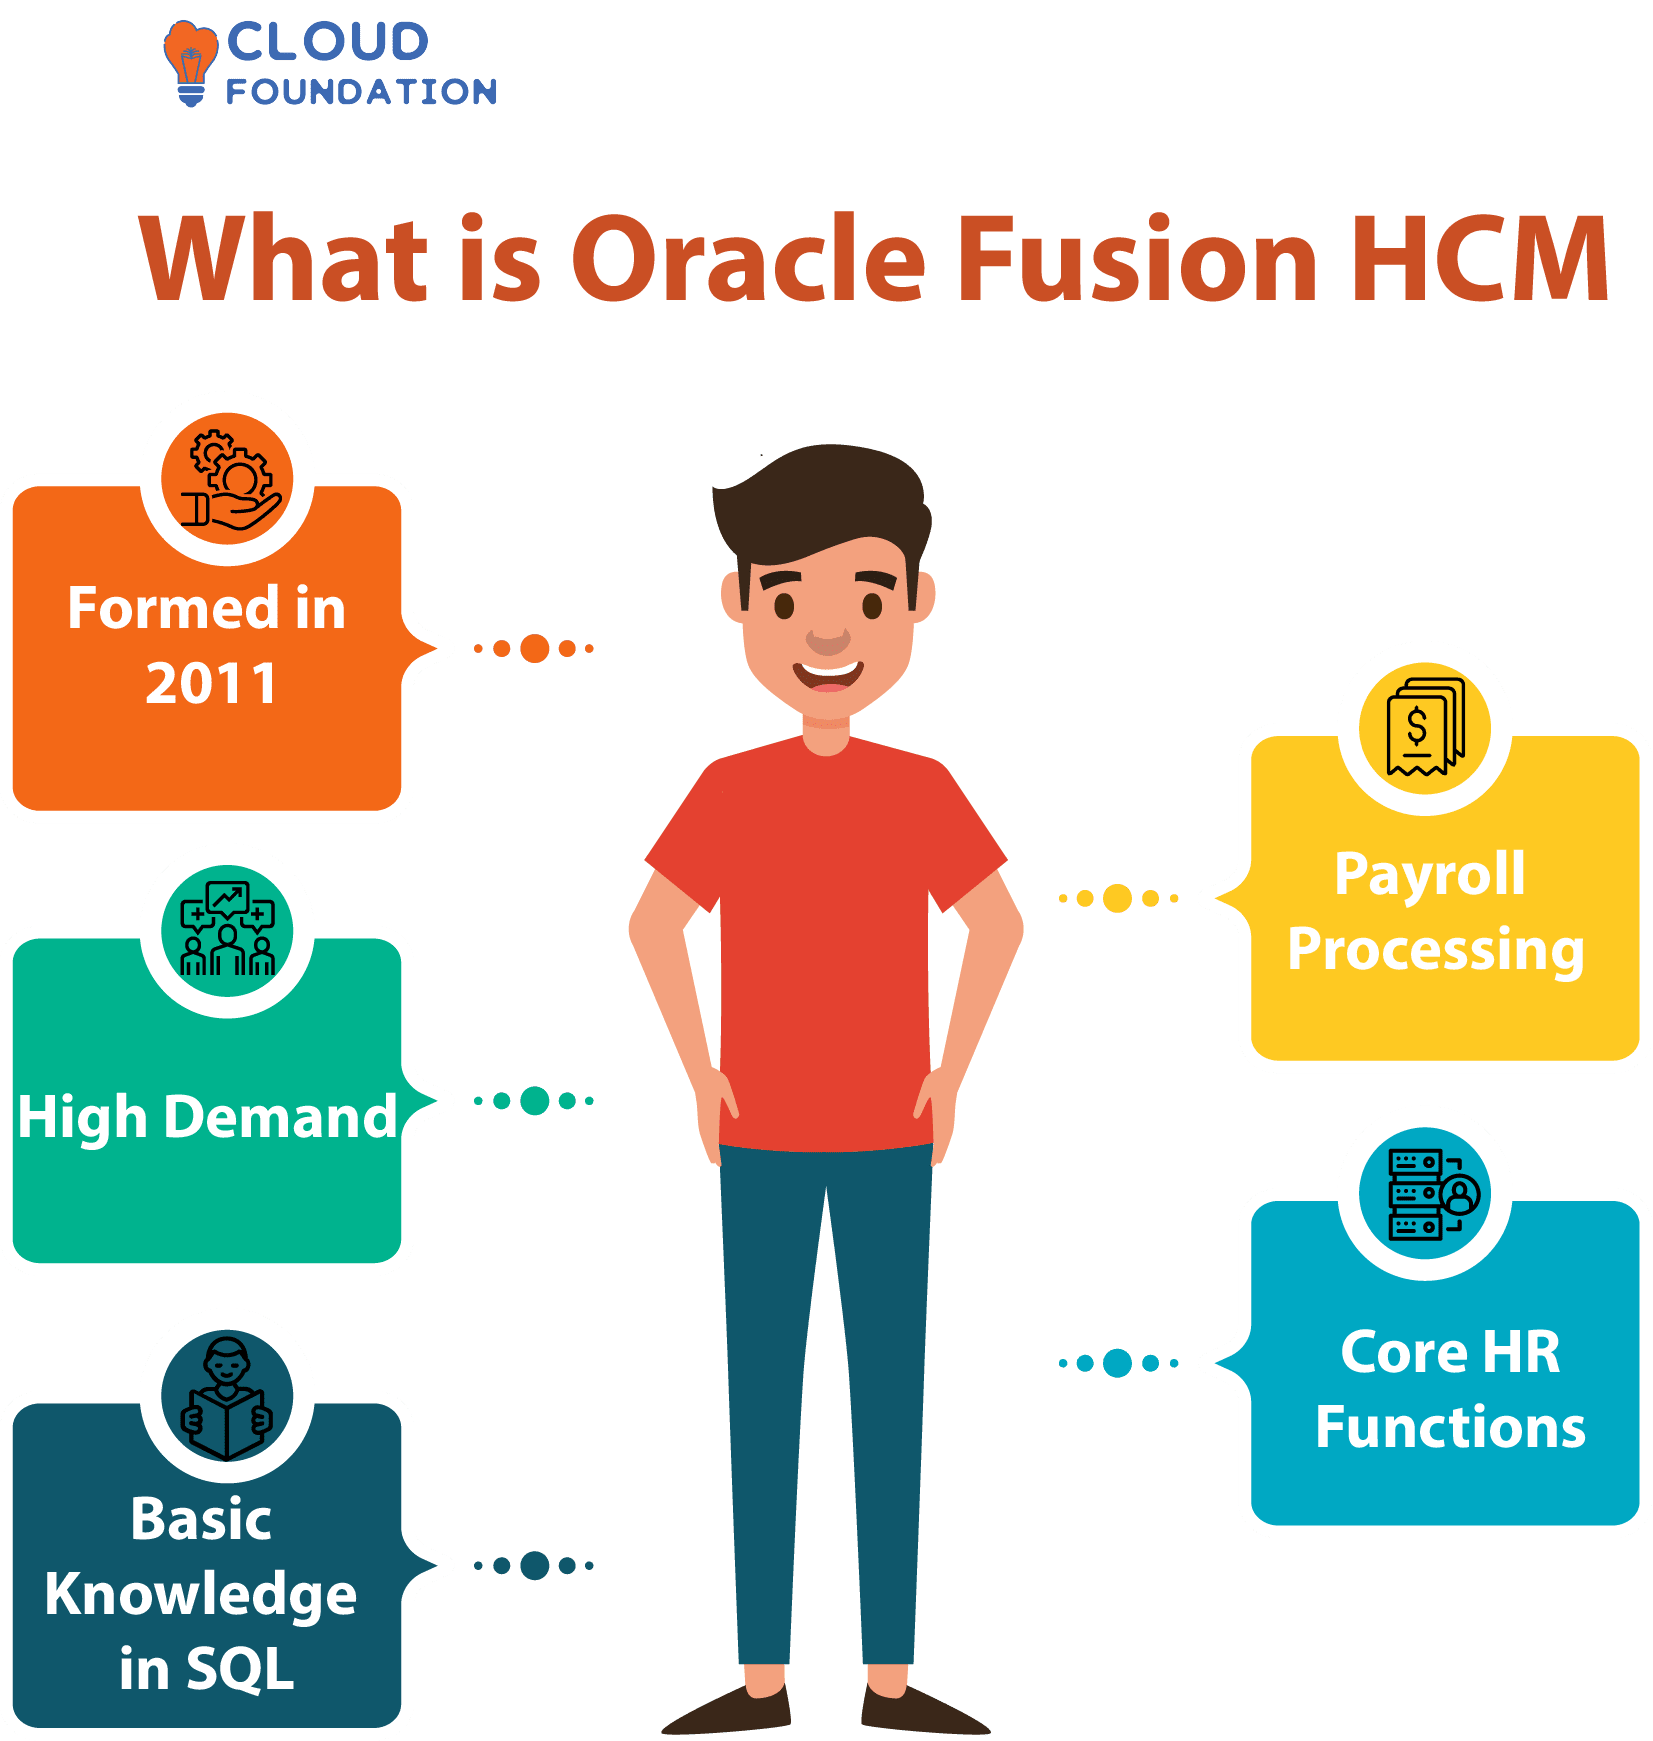 what is assignment name in oracle fusion hcm